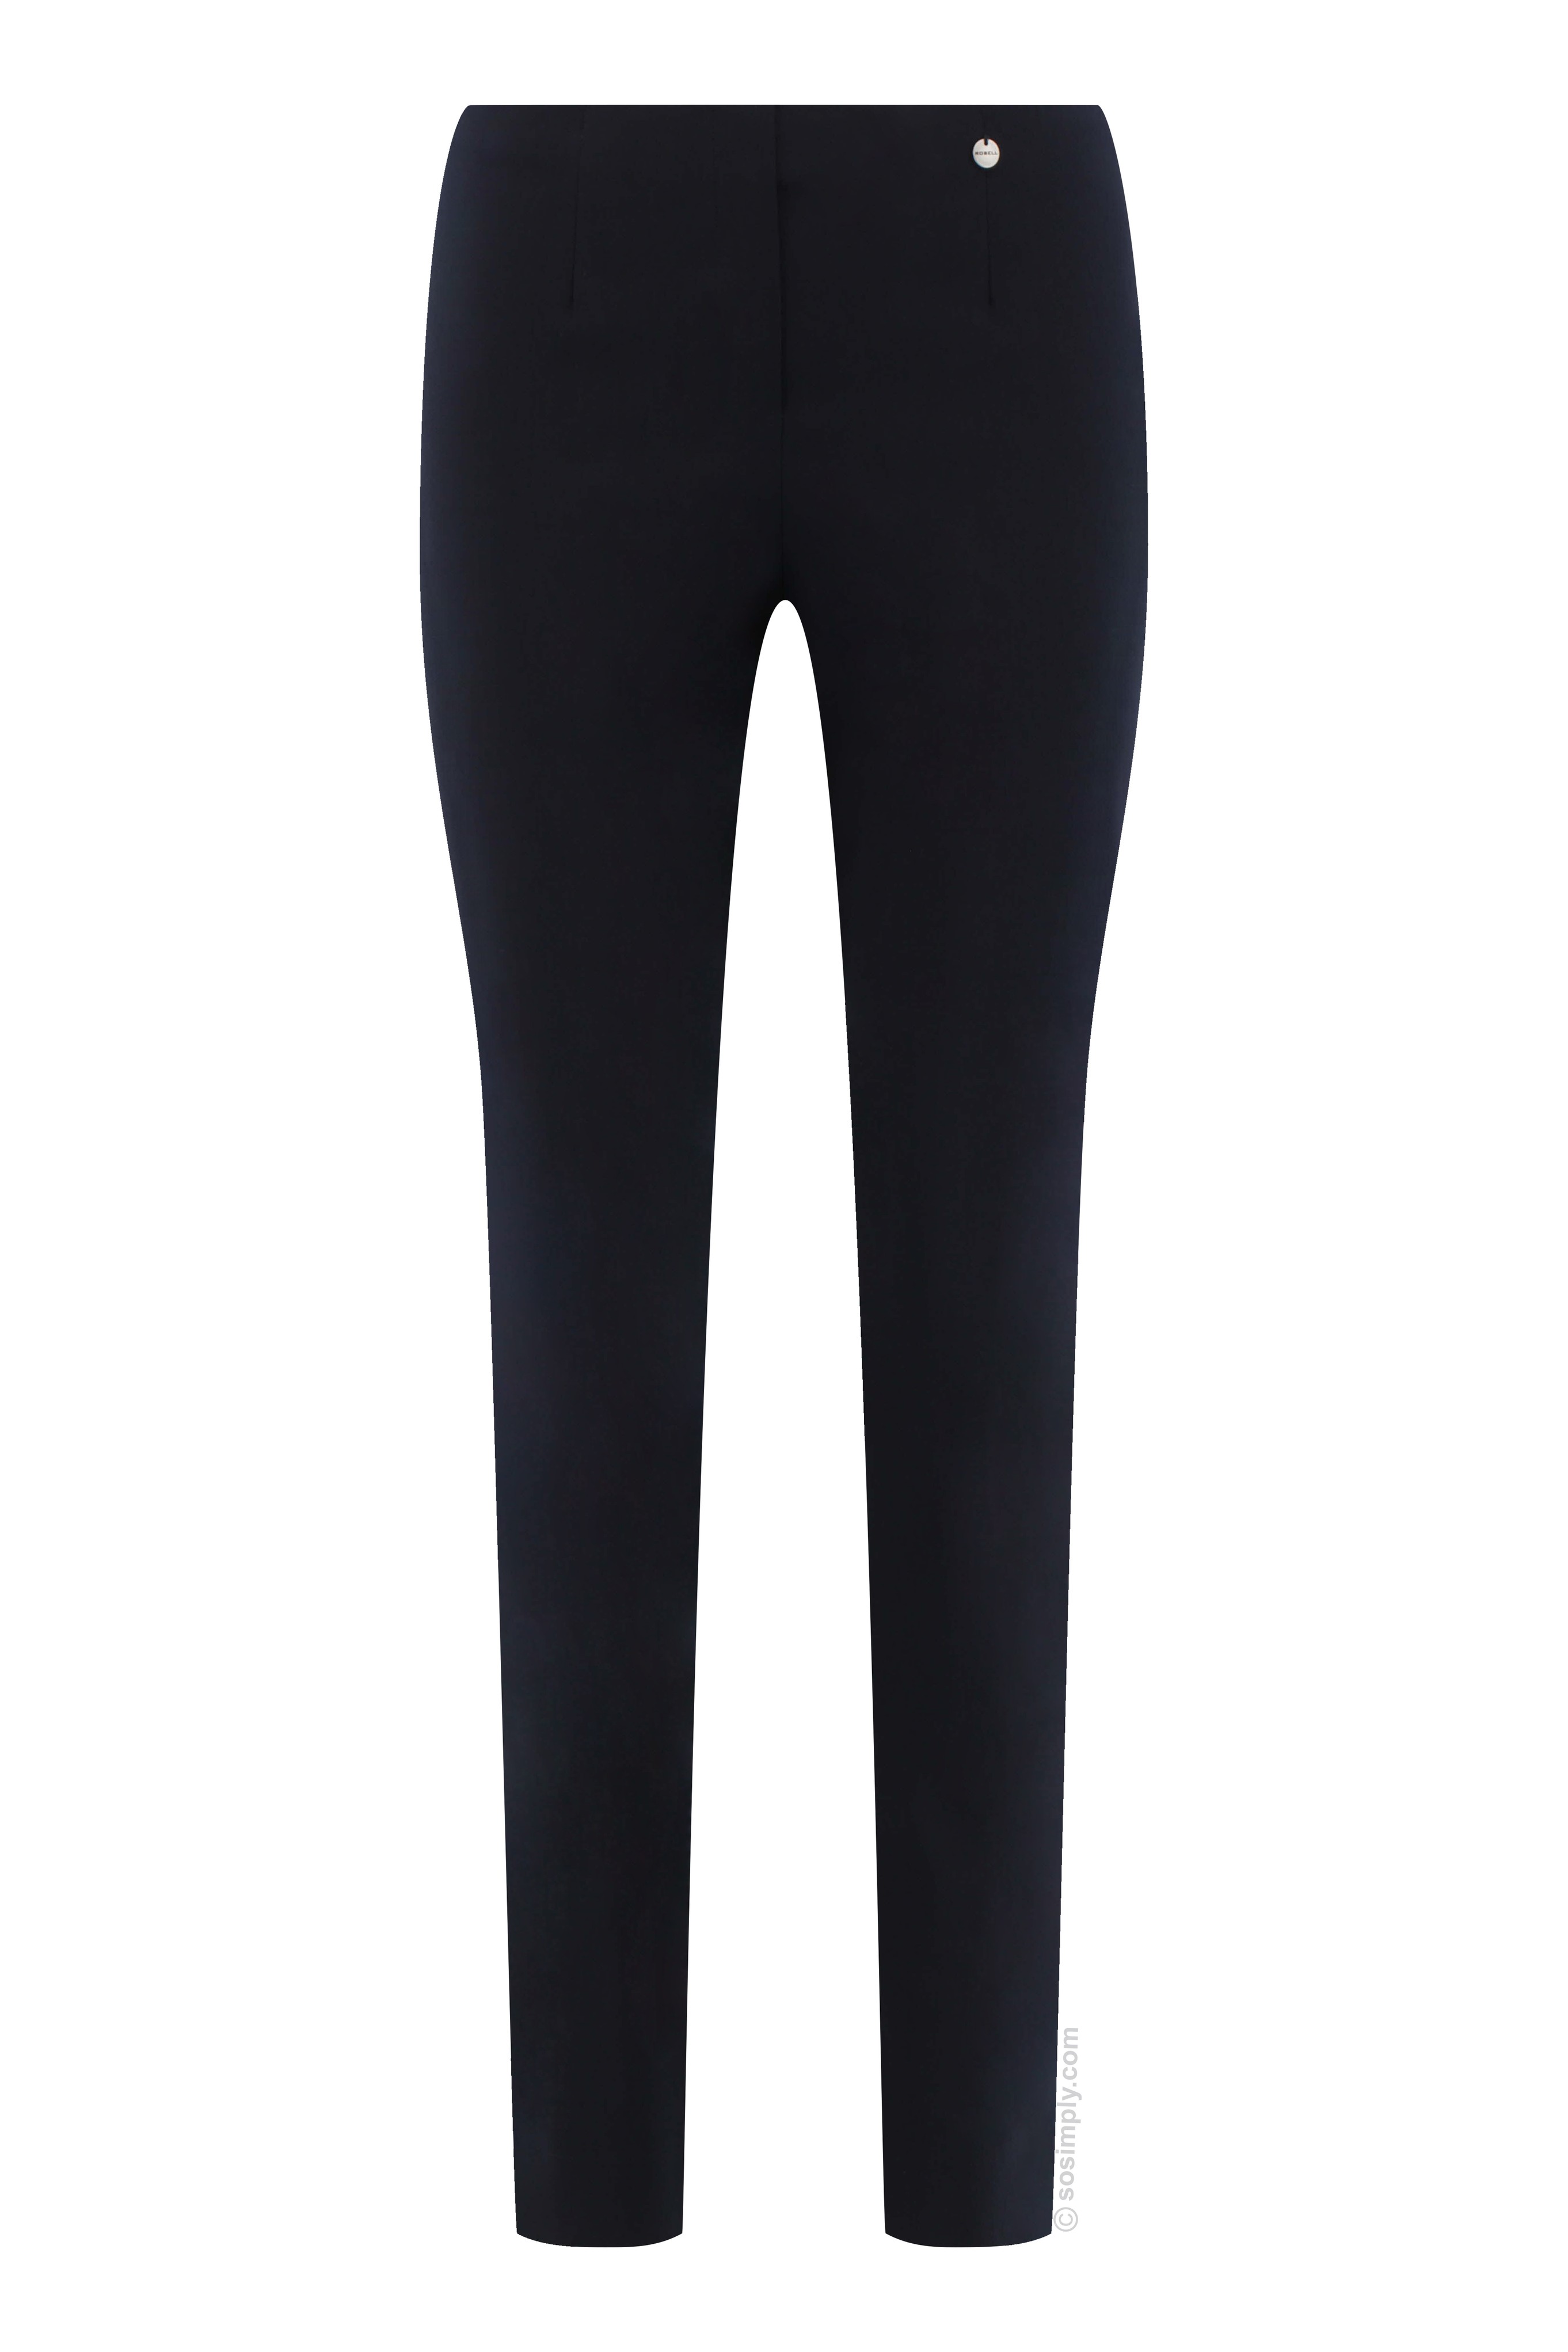 Robell Marie Fleece Lined Winter Trousers - So Simply Robell